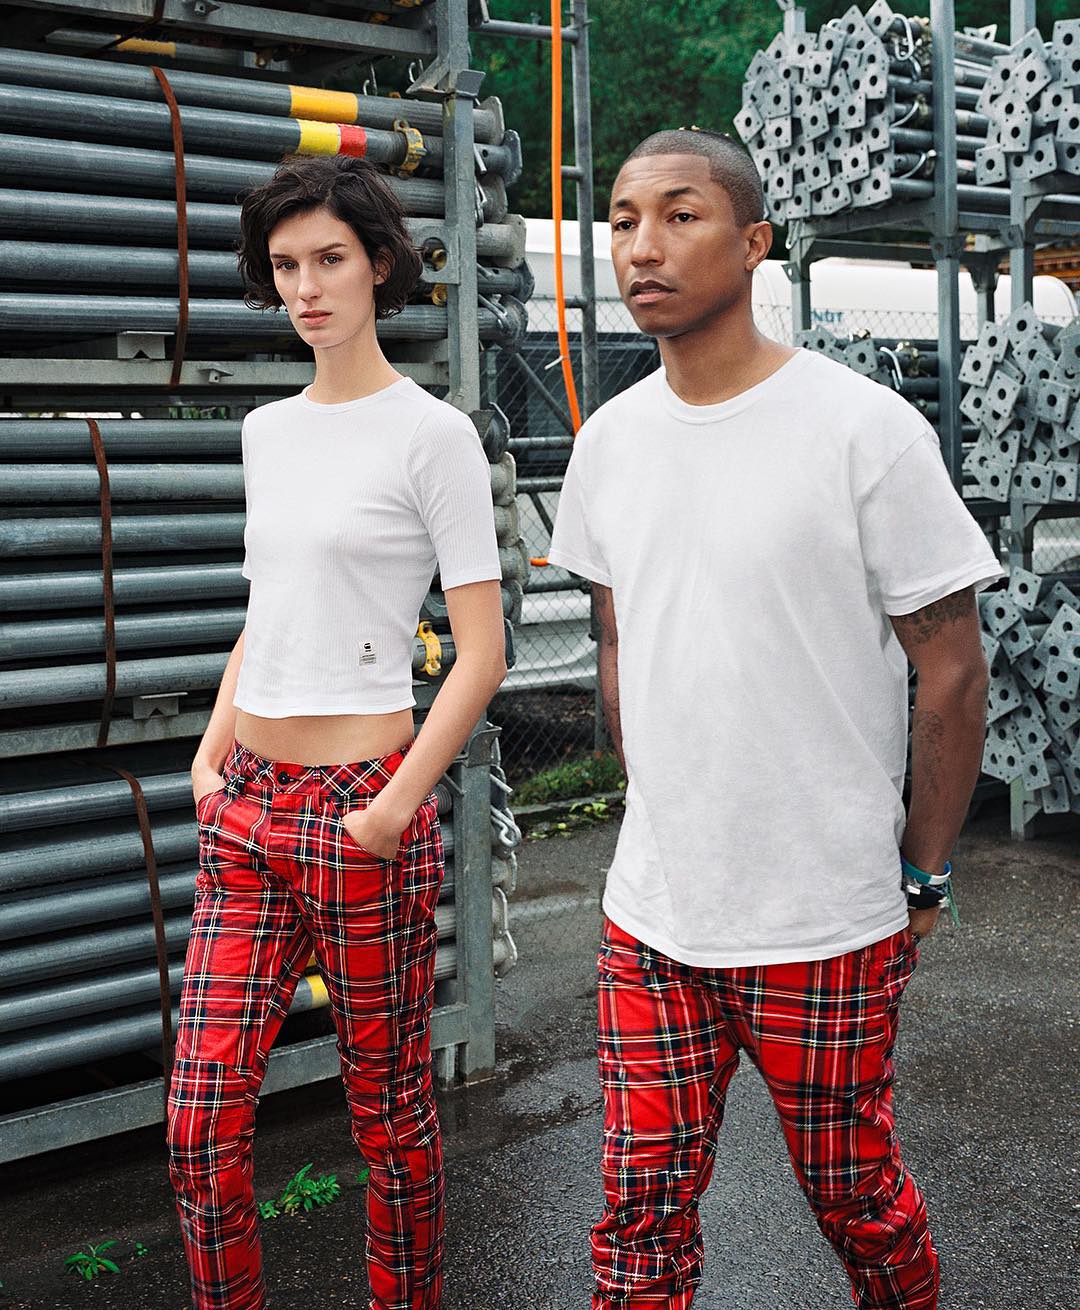 red tartan pants outfit